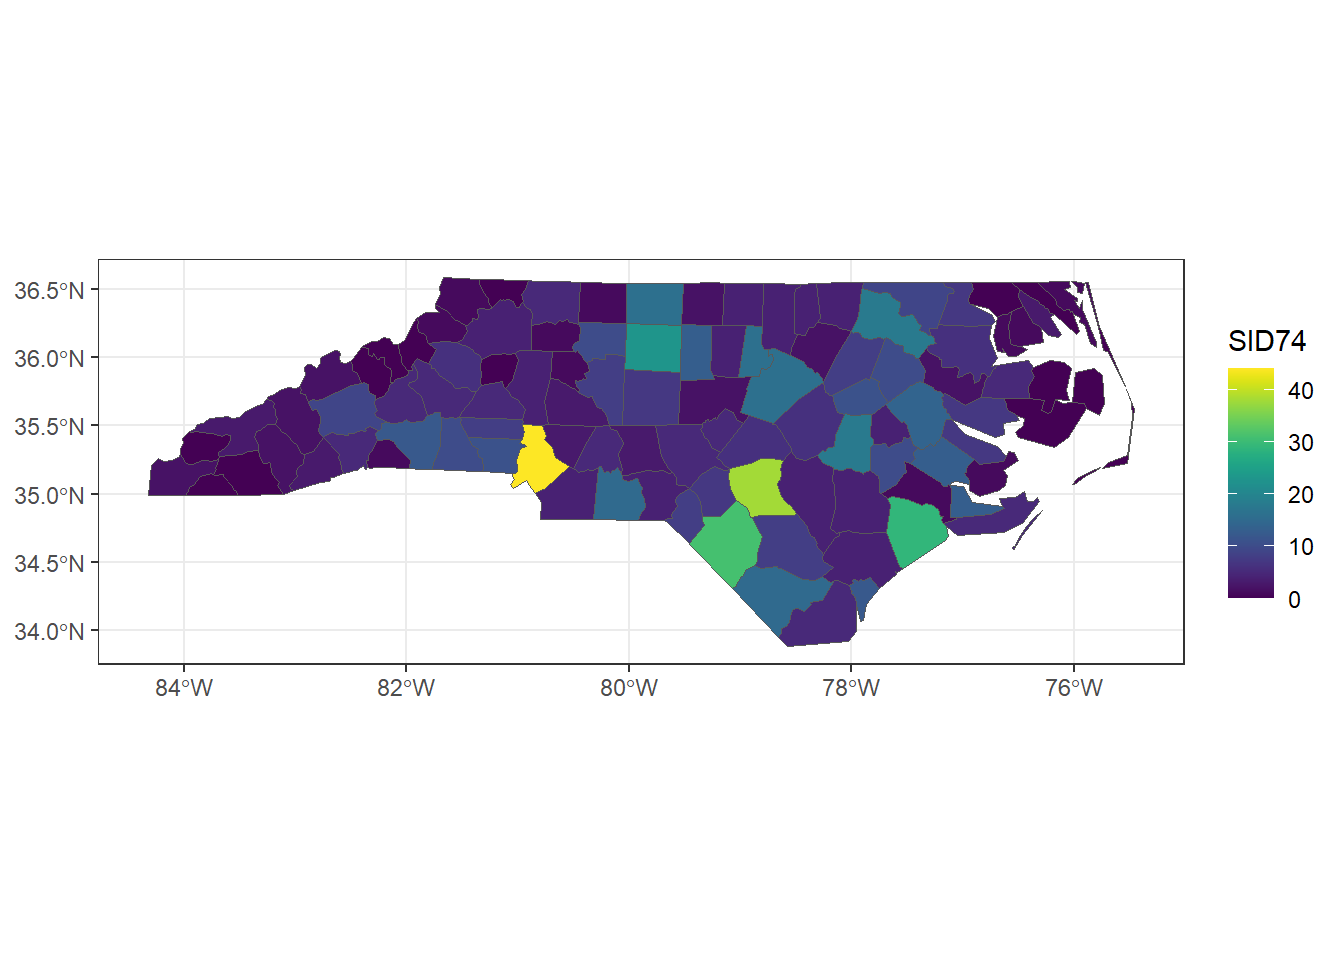 Map of number of sudden infant deaths in North Carolina, USA, in 1974 created with **ggplot2**.